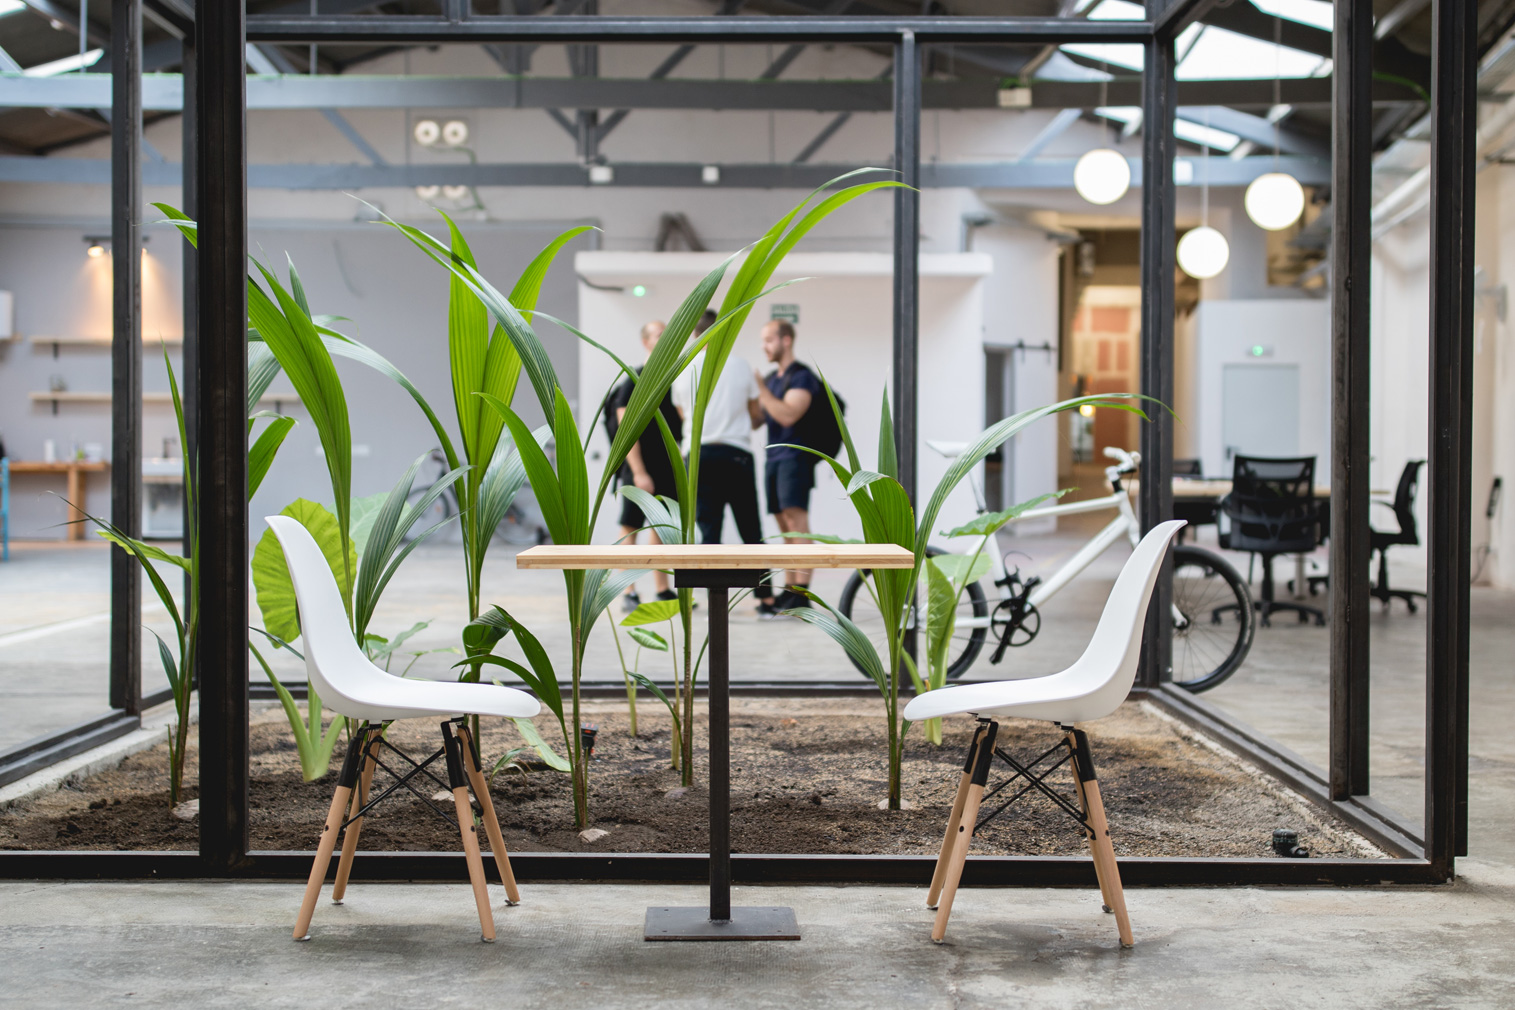 Cahoots coworking space in Barcelona